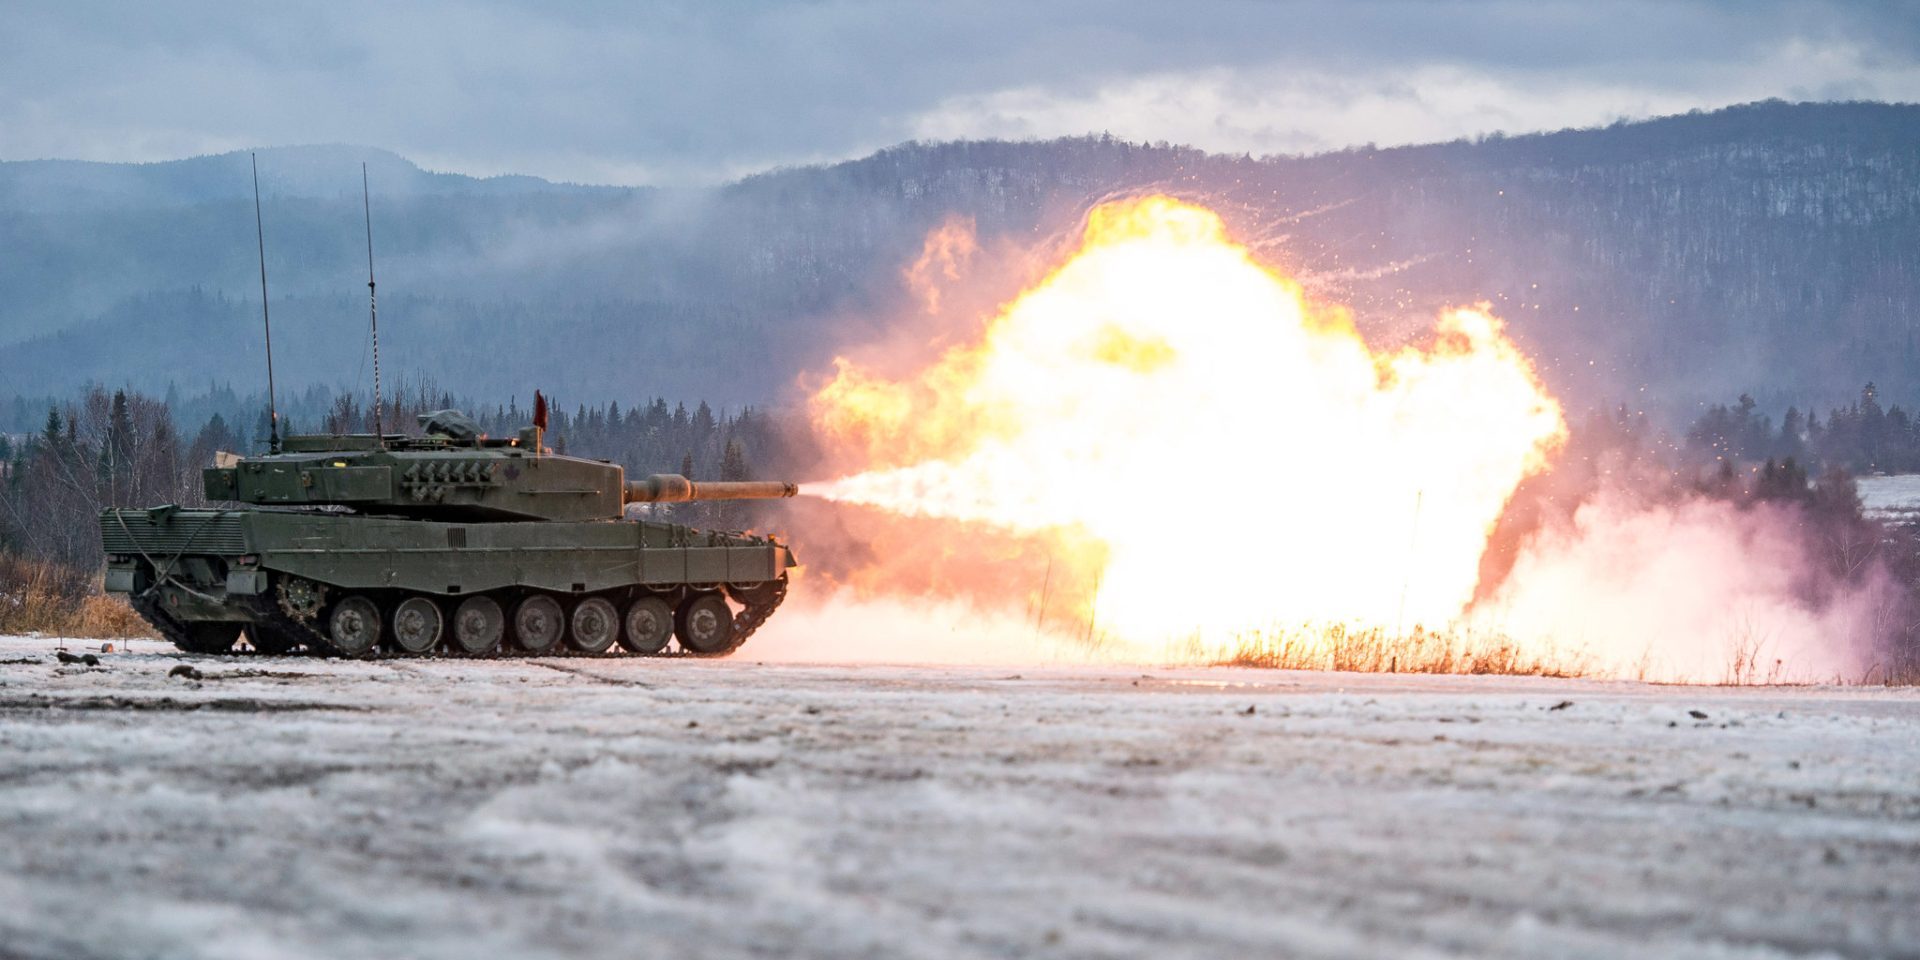 Soldiers conduct firing simulations with Leopard 2A4 tanks at CFB Valcartier in Quebec City, Que., on Nov. 22, 2017. DND photograph by Aviator Stéphanie Labossière